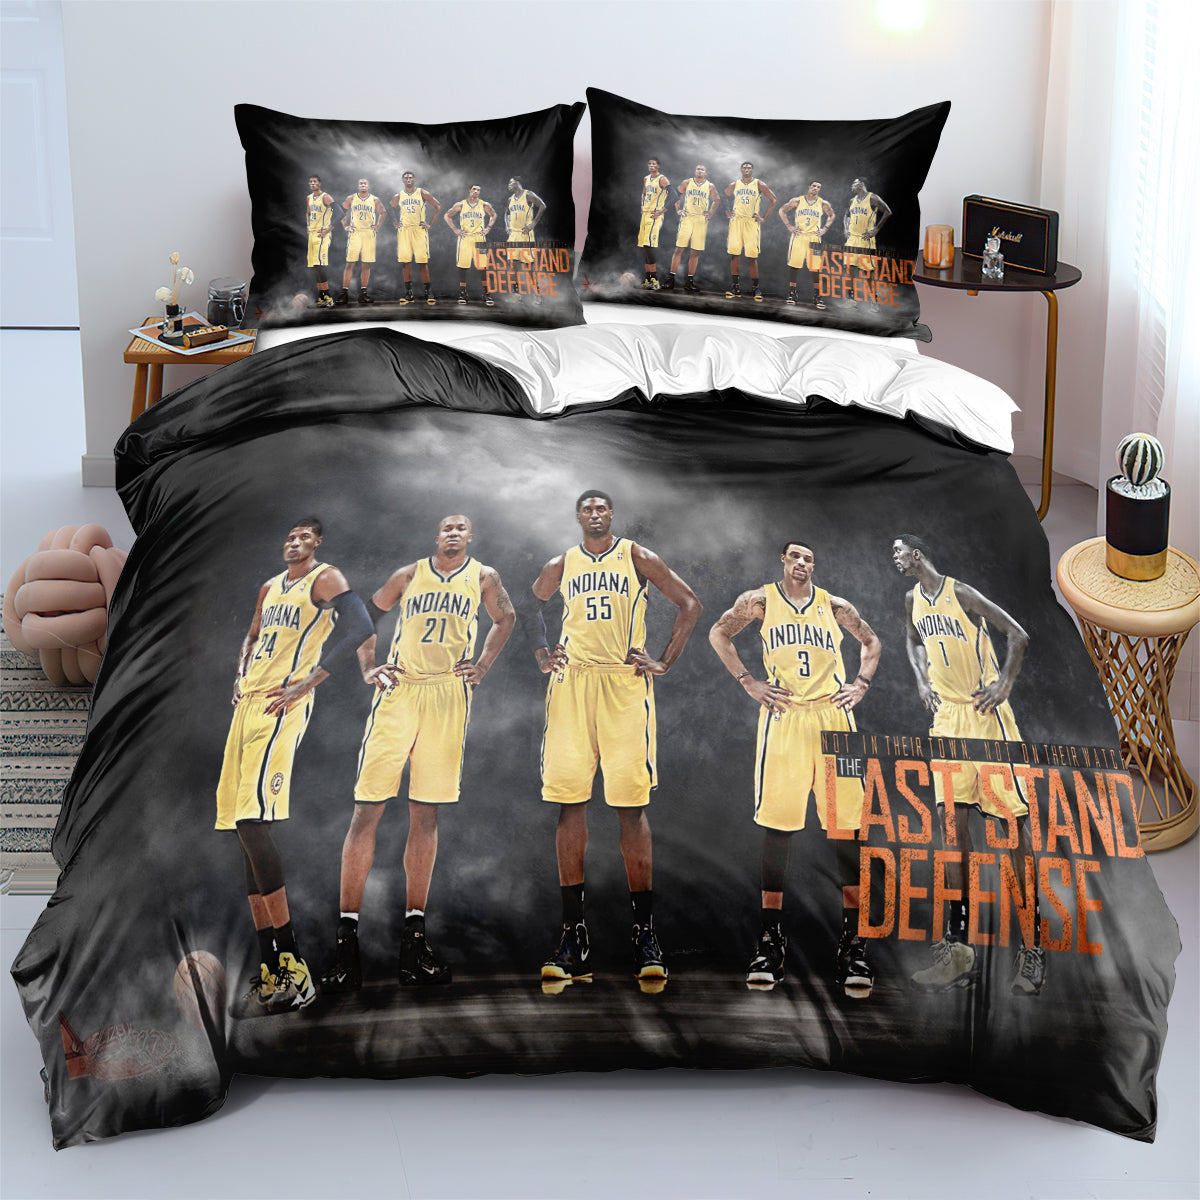 Indiana Pacers Bedding Set Quilt Cover Without Filler